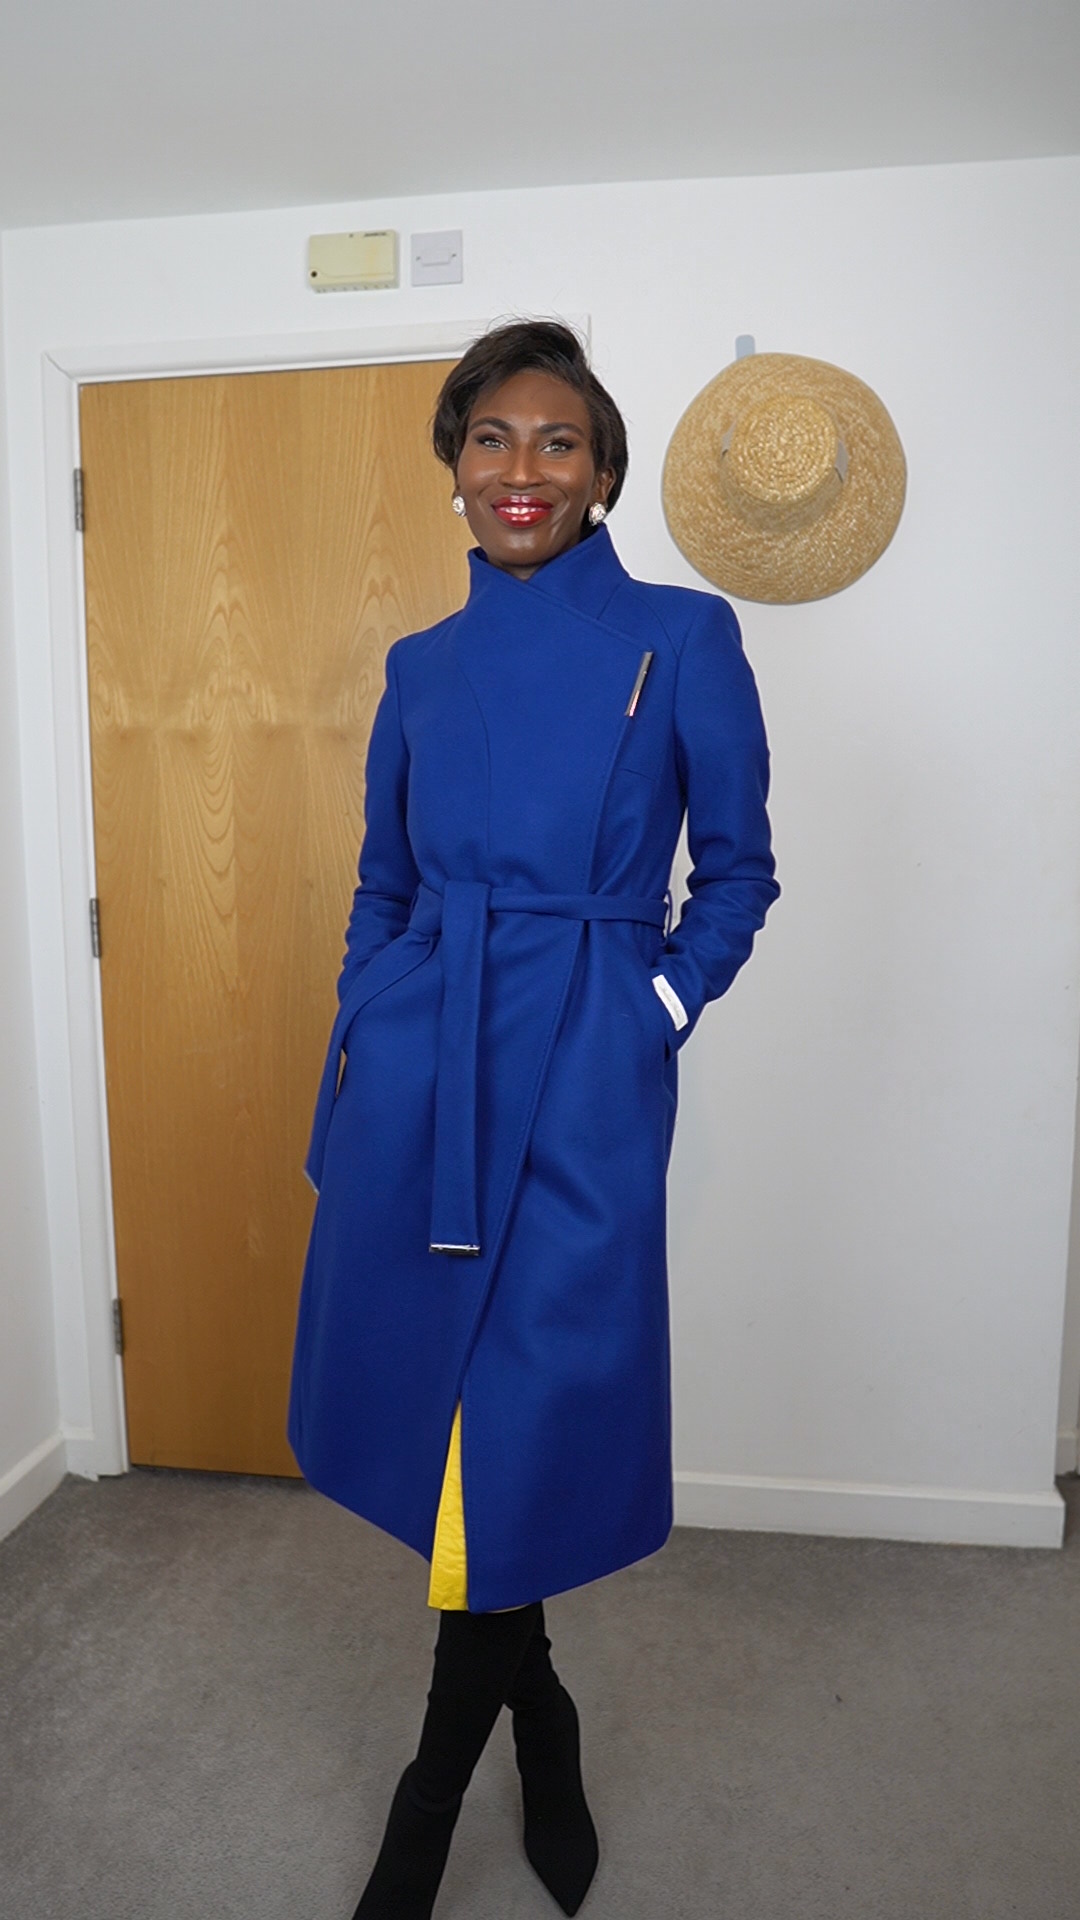 The Most Stylish coat - Ted Baker Coat Review
Thatcorporatechic